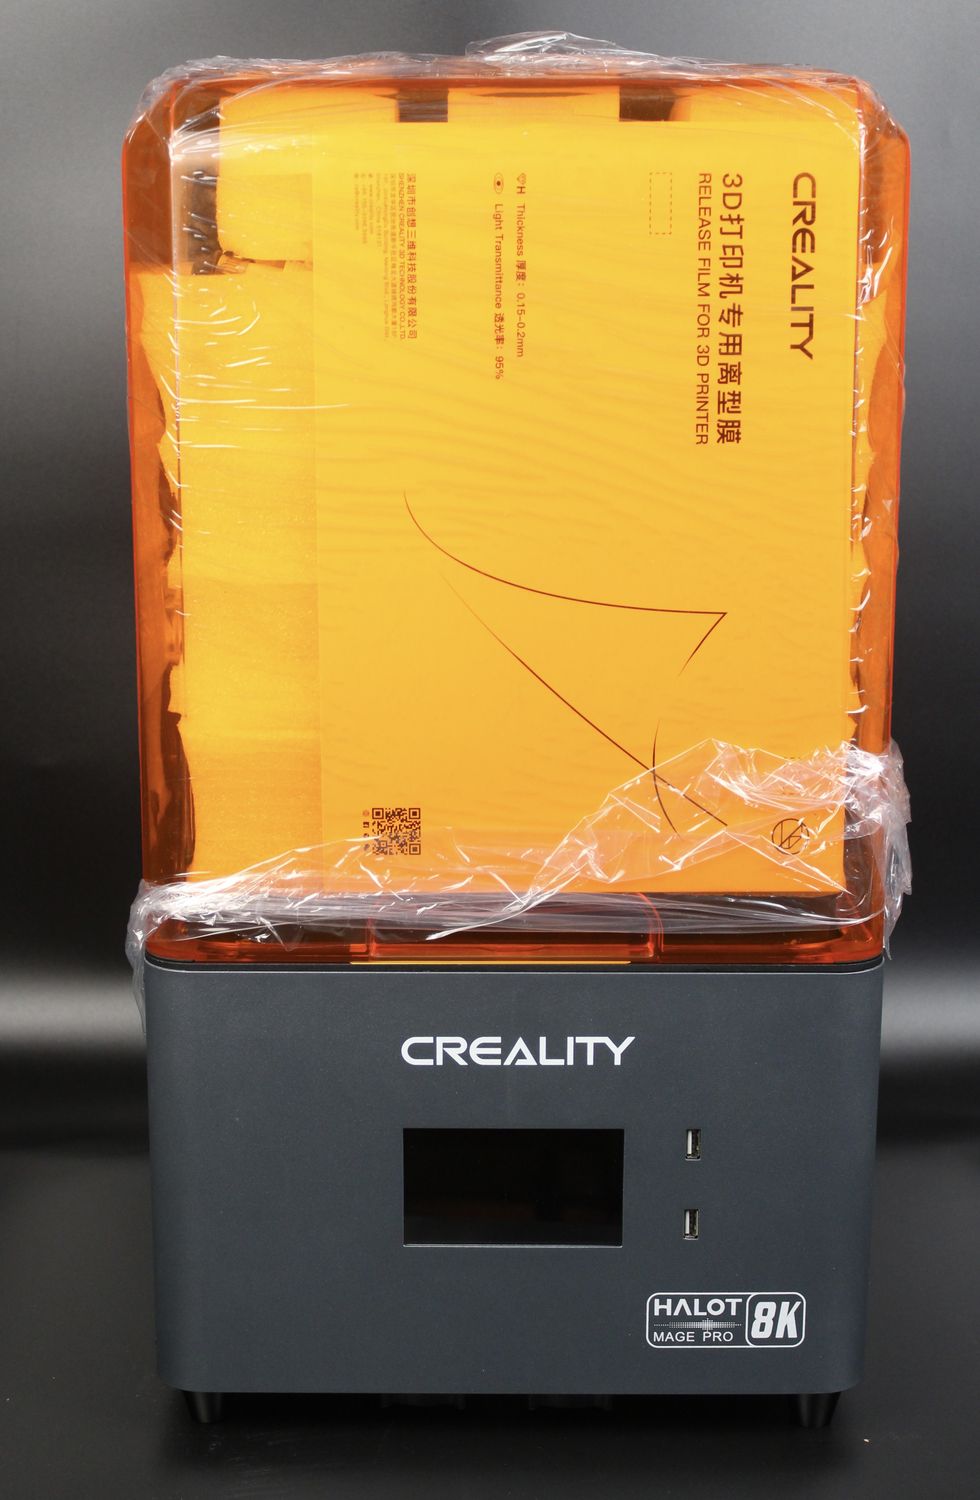 Creality Halot Mage Pro Review Packaging3 | Creality Halot Mage Pro Review: Great Prints, Bad Software